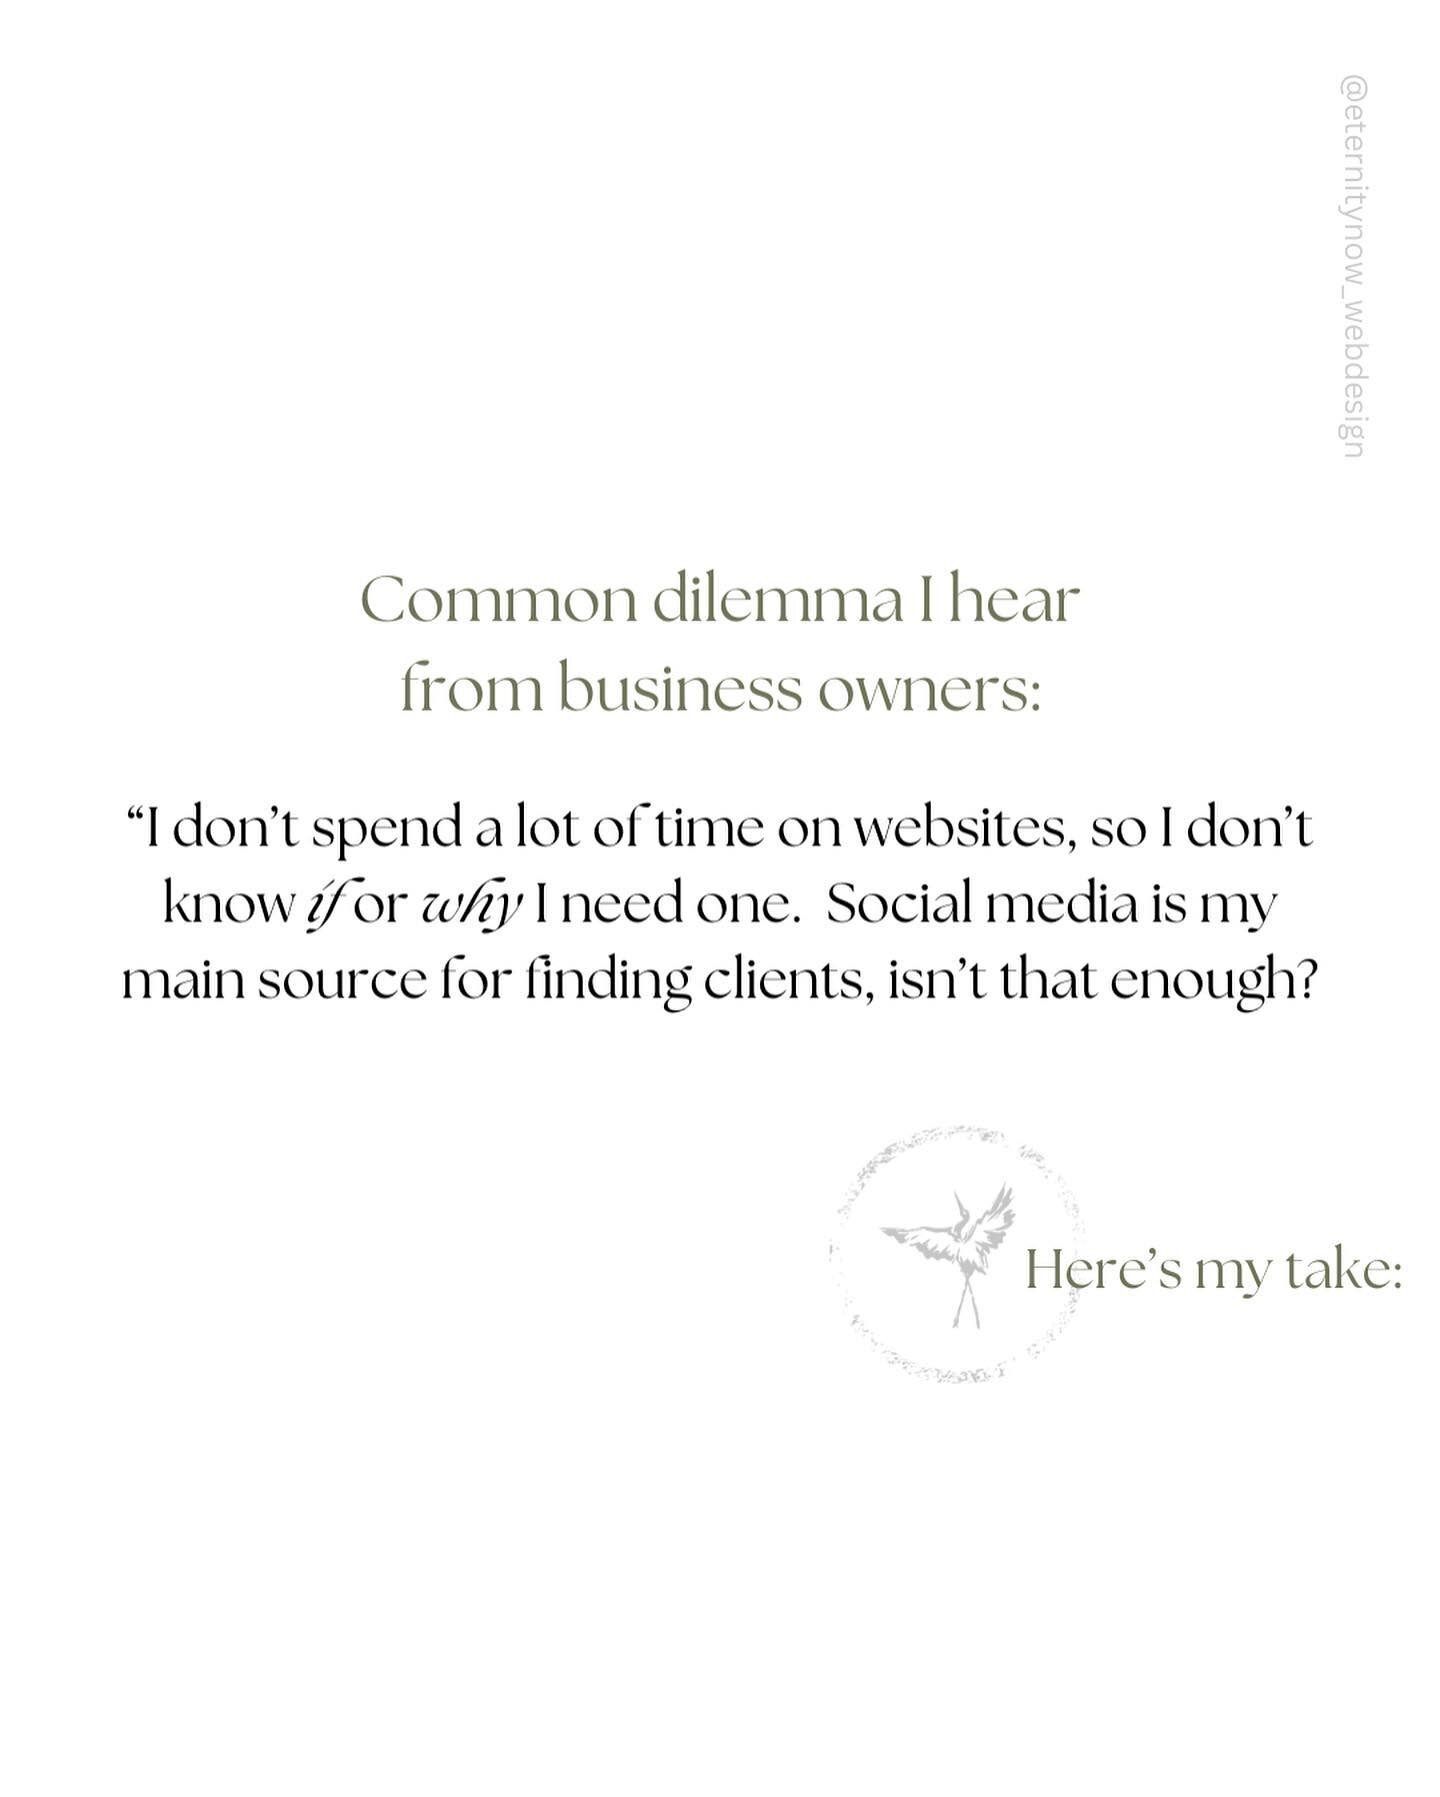 Common dilemma I hear
from business owners: 

&ldquo;I don&rsquo;t spend a lot of time on websites, so I don&rsquo;t know if or why I need one. Social media is my main source for finding clients, isn&rsquo;t that enough?&rdquo; 

This is totally norm